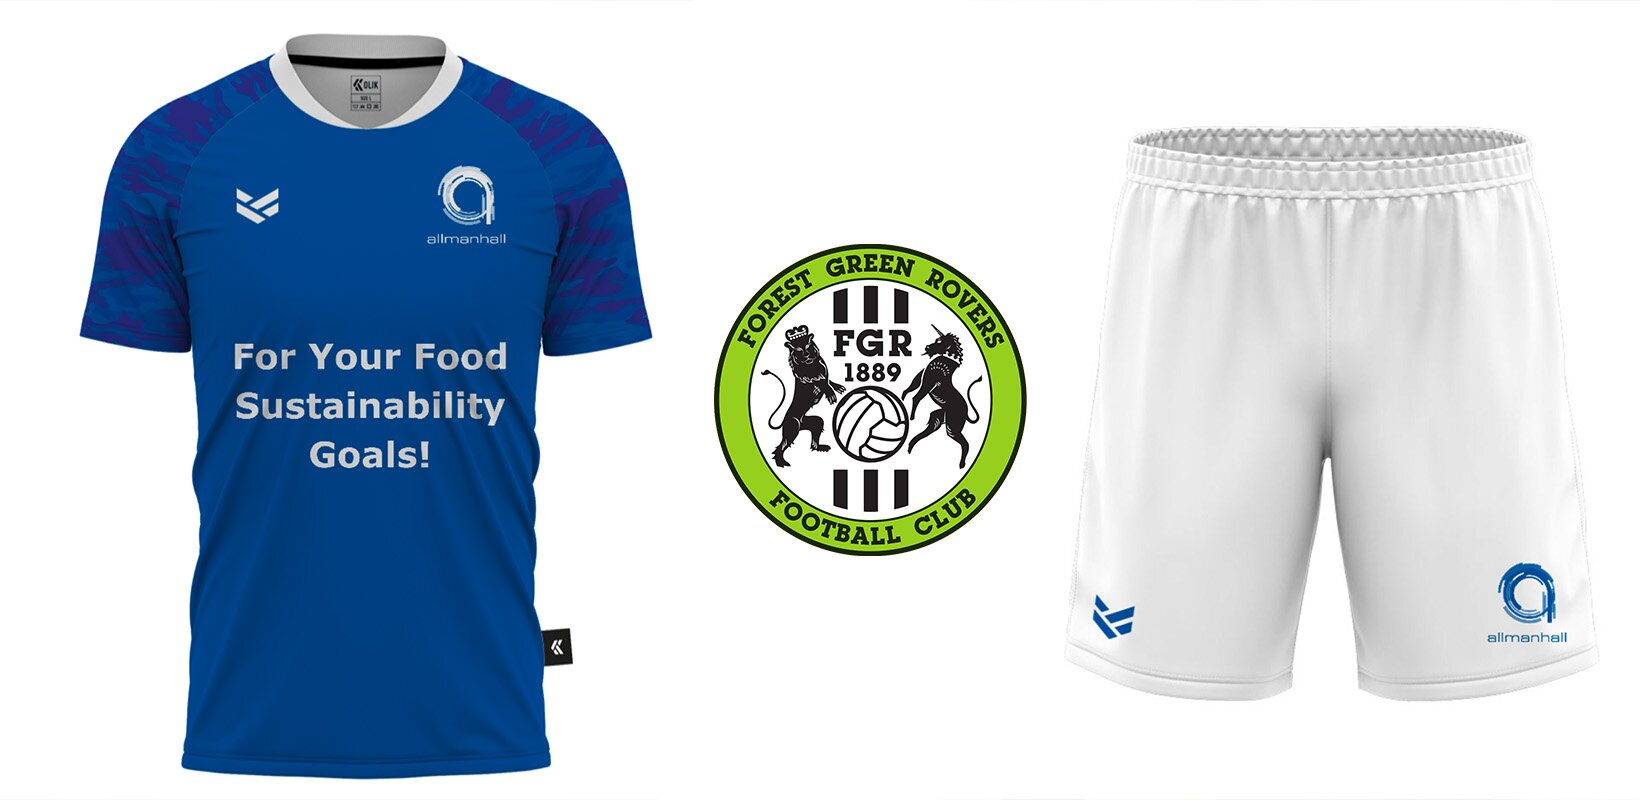 allmanhall partners with Forest Green Rovers